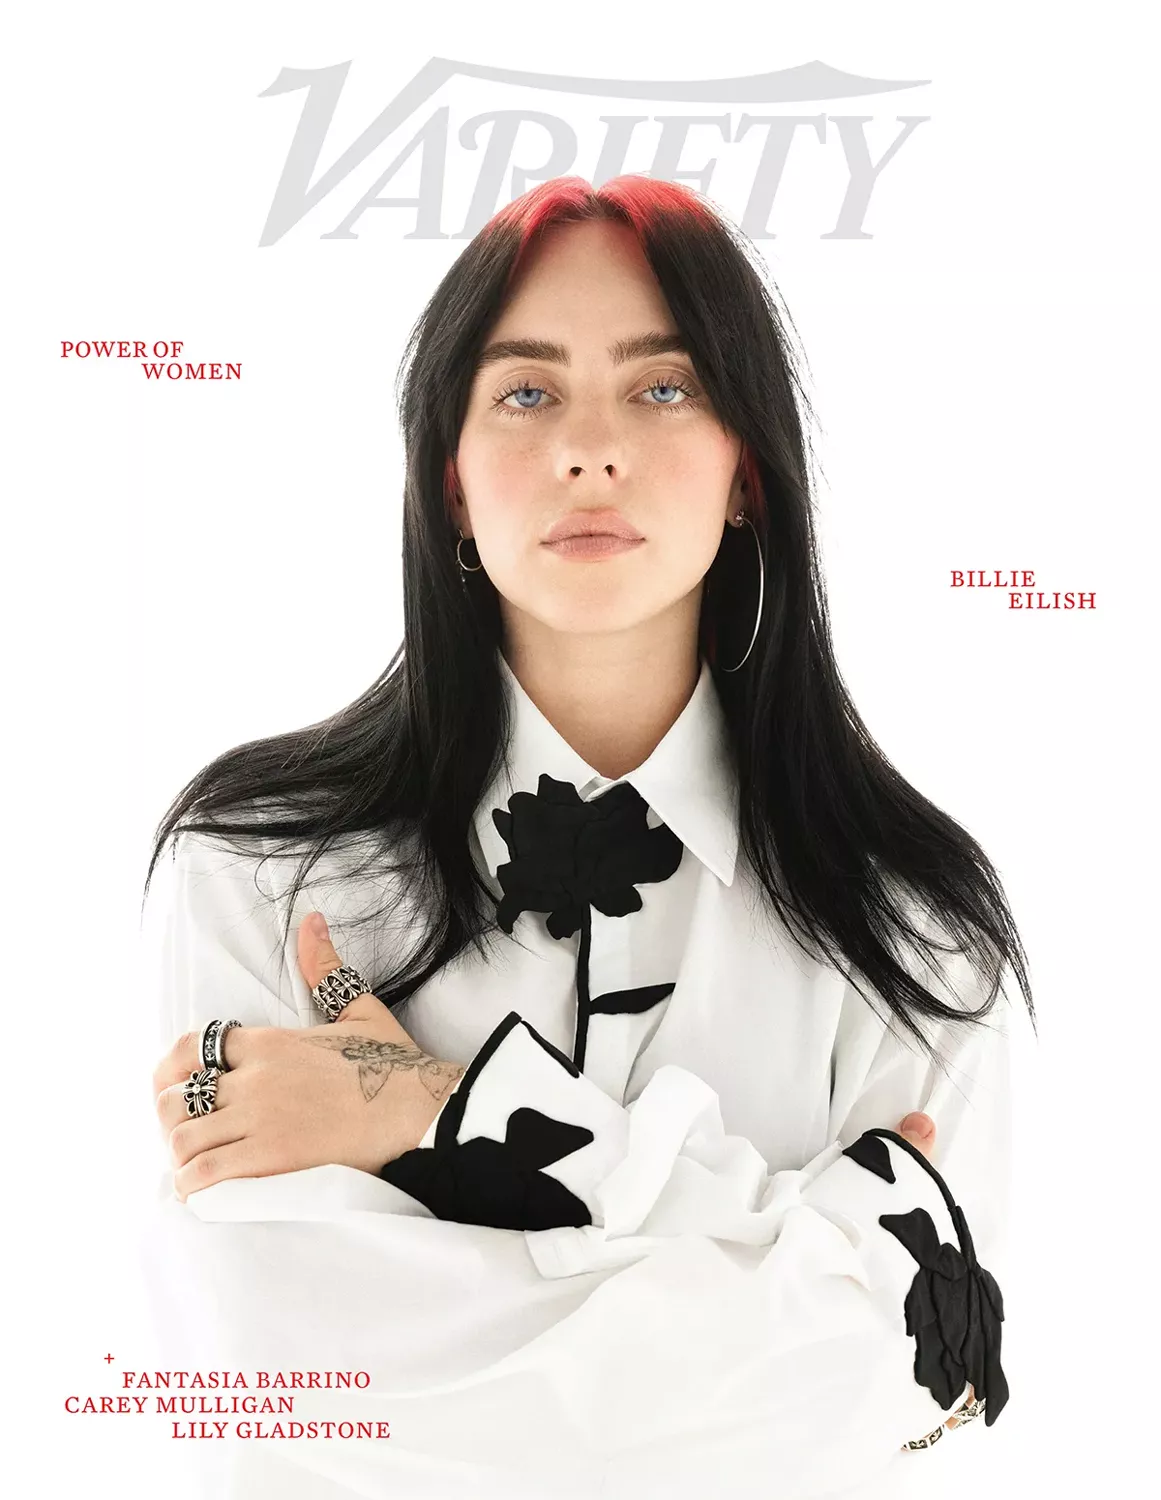 Billie Eilish Opens Up About Feeling 'Attracted' to Women but 'Intimidated' by Their 'Beauty' and 'Presence'